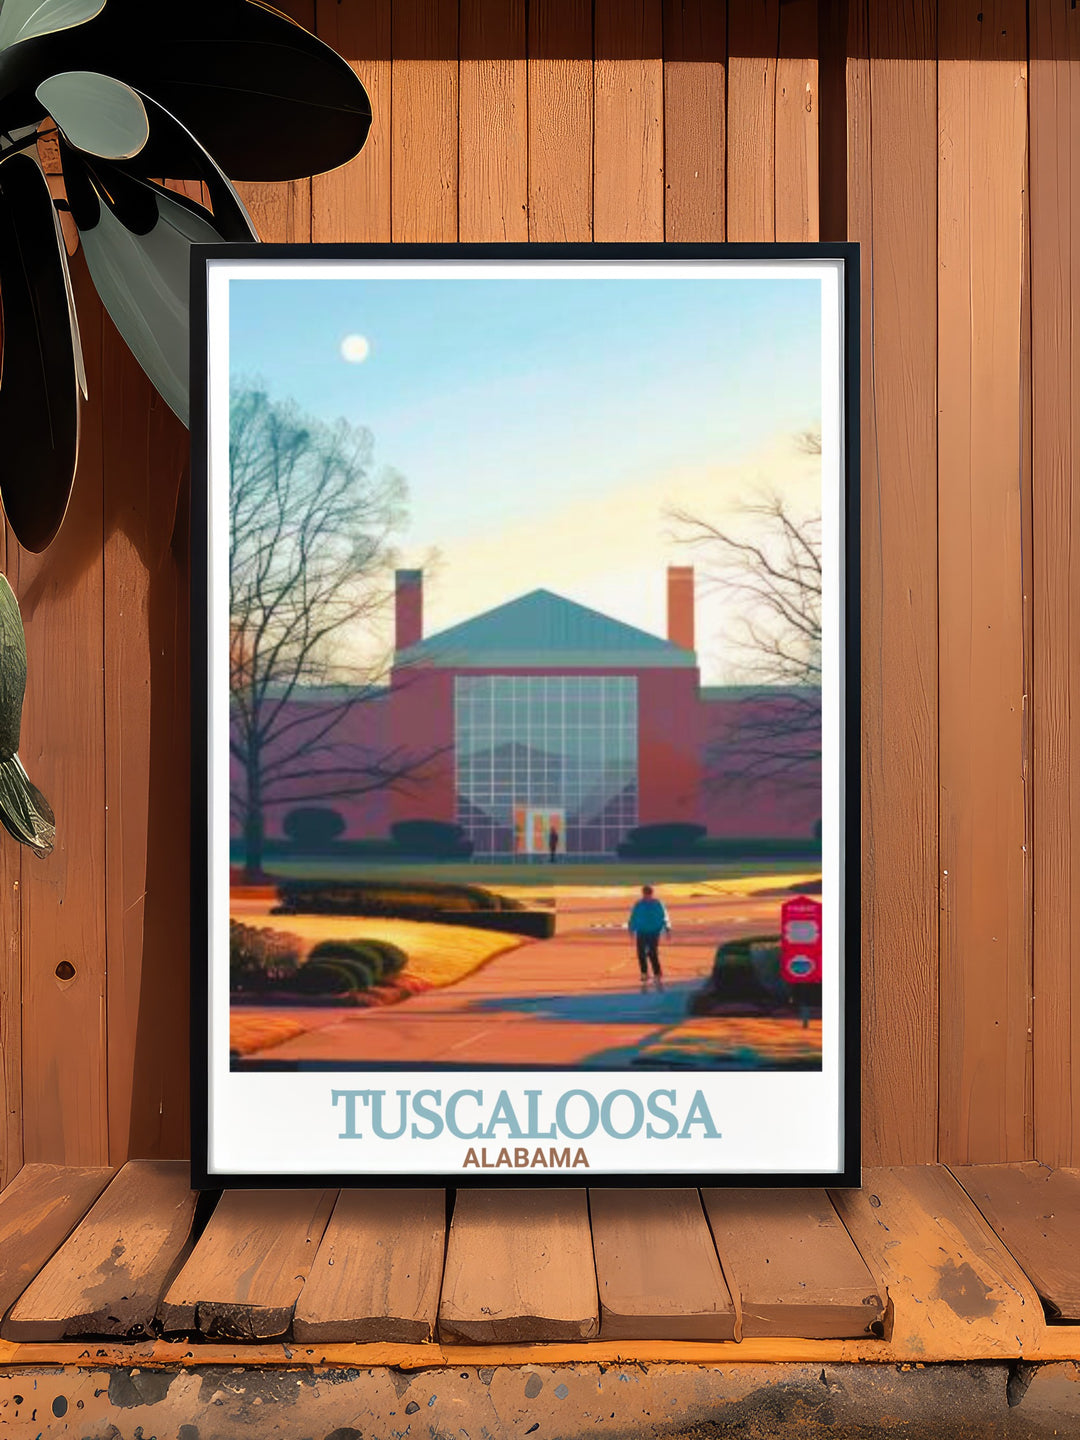 Paul W. Bryant Museum modern prints featuring Tuscaloosa skyline perfect for adding a touch of Alabama to your decor this Tuscaloosa photo captures the citys vibrant atmosphere and makes an ideal gift for any Tuscaloosa enthusiast